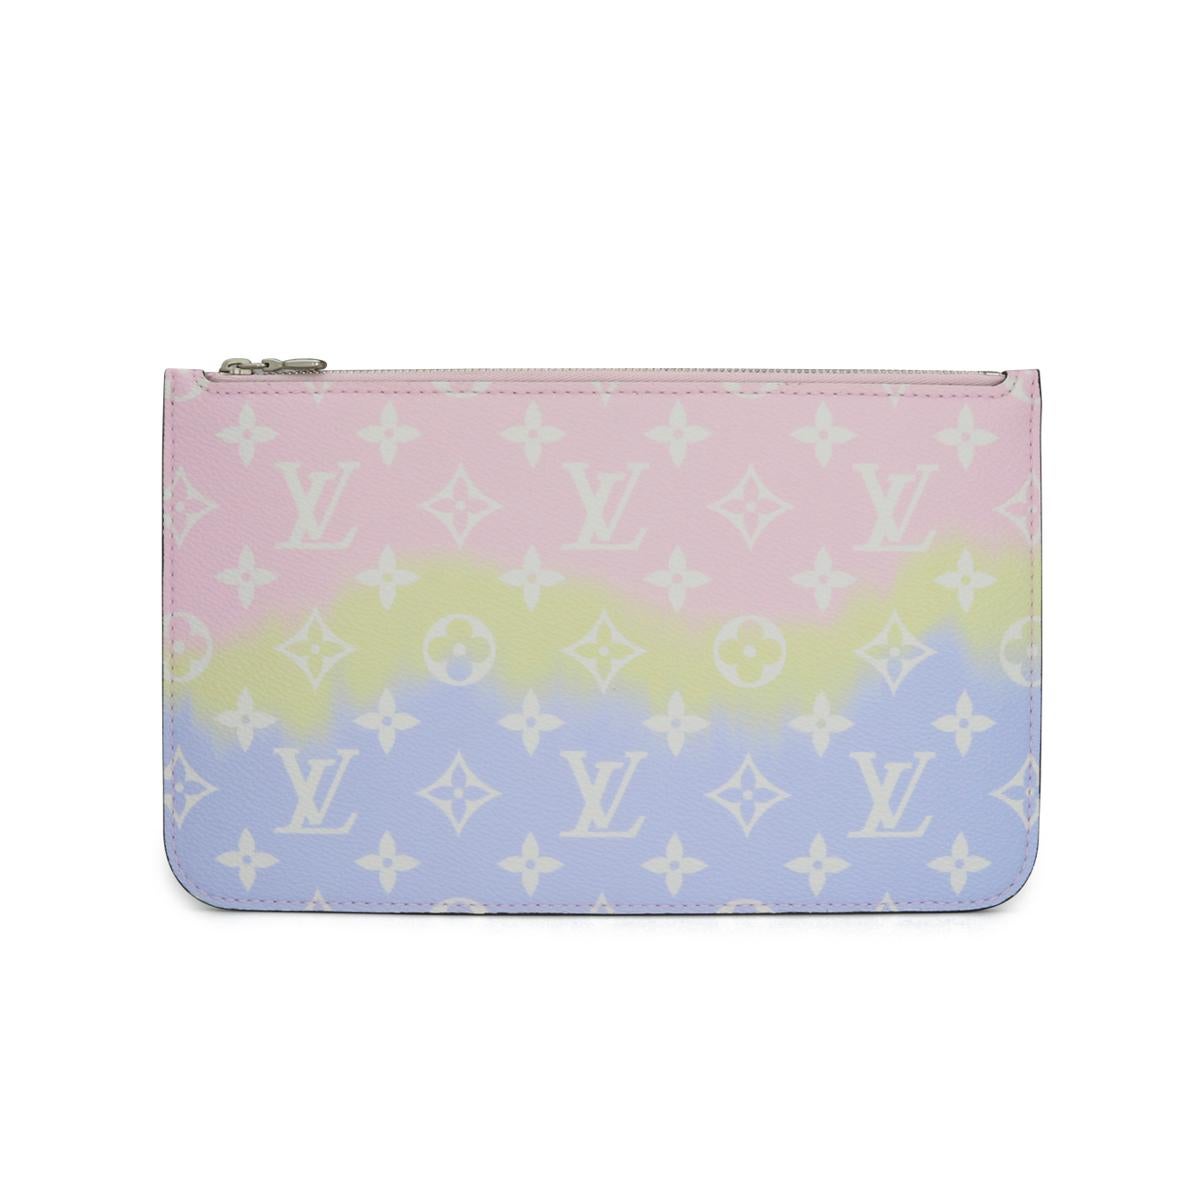 Louis Vuitton Escale Neverfull MM Bag in Pastel 2020 Limited Edition For Sale 10